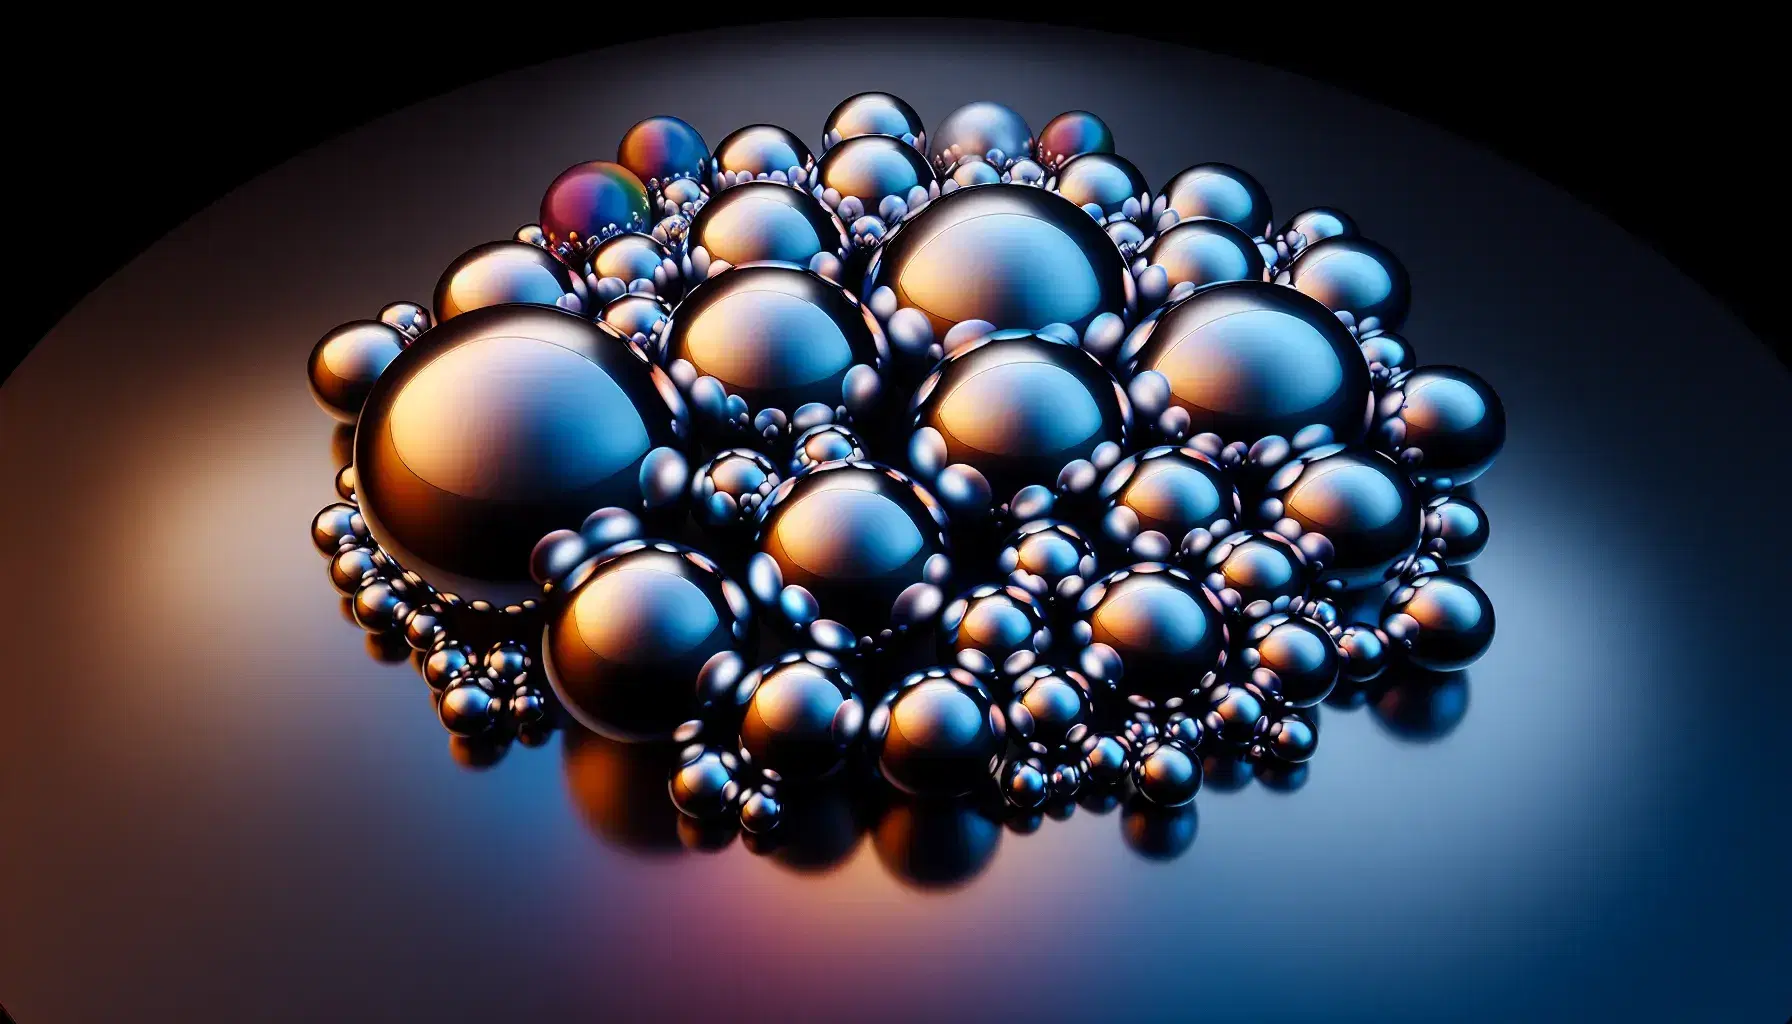 Reflective metallic spheres of varying sizes on a matte black surface, casting shadows and mirroring a colorful environment with blues, purples, oranges, and reds.